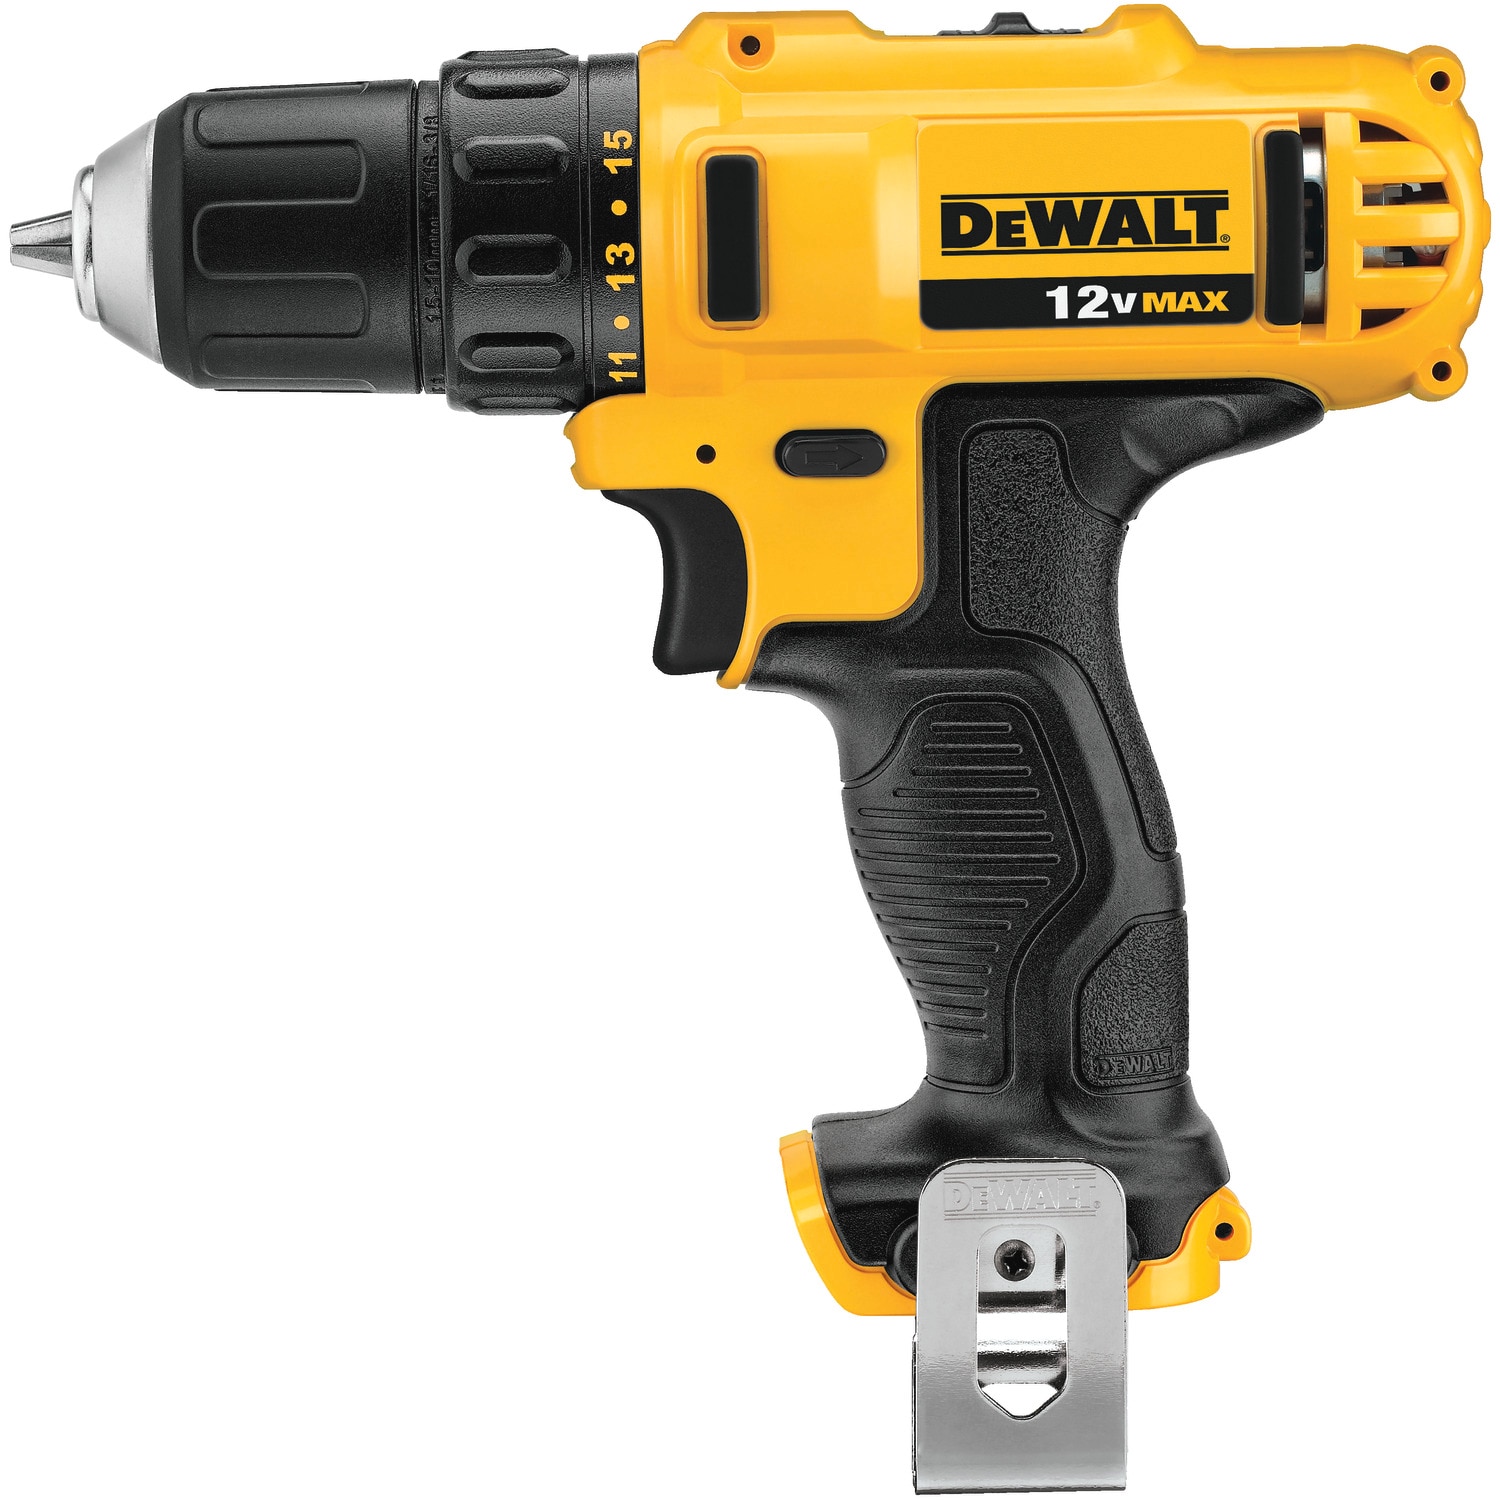 12V/20V Max Cordless Drill and Driver, 3/8 Inch, with LED Work Light -  China Power Tool, Cordless Drill